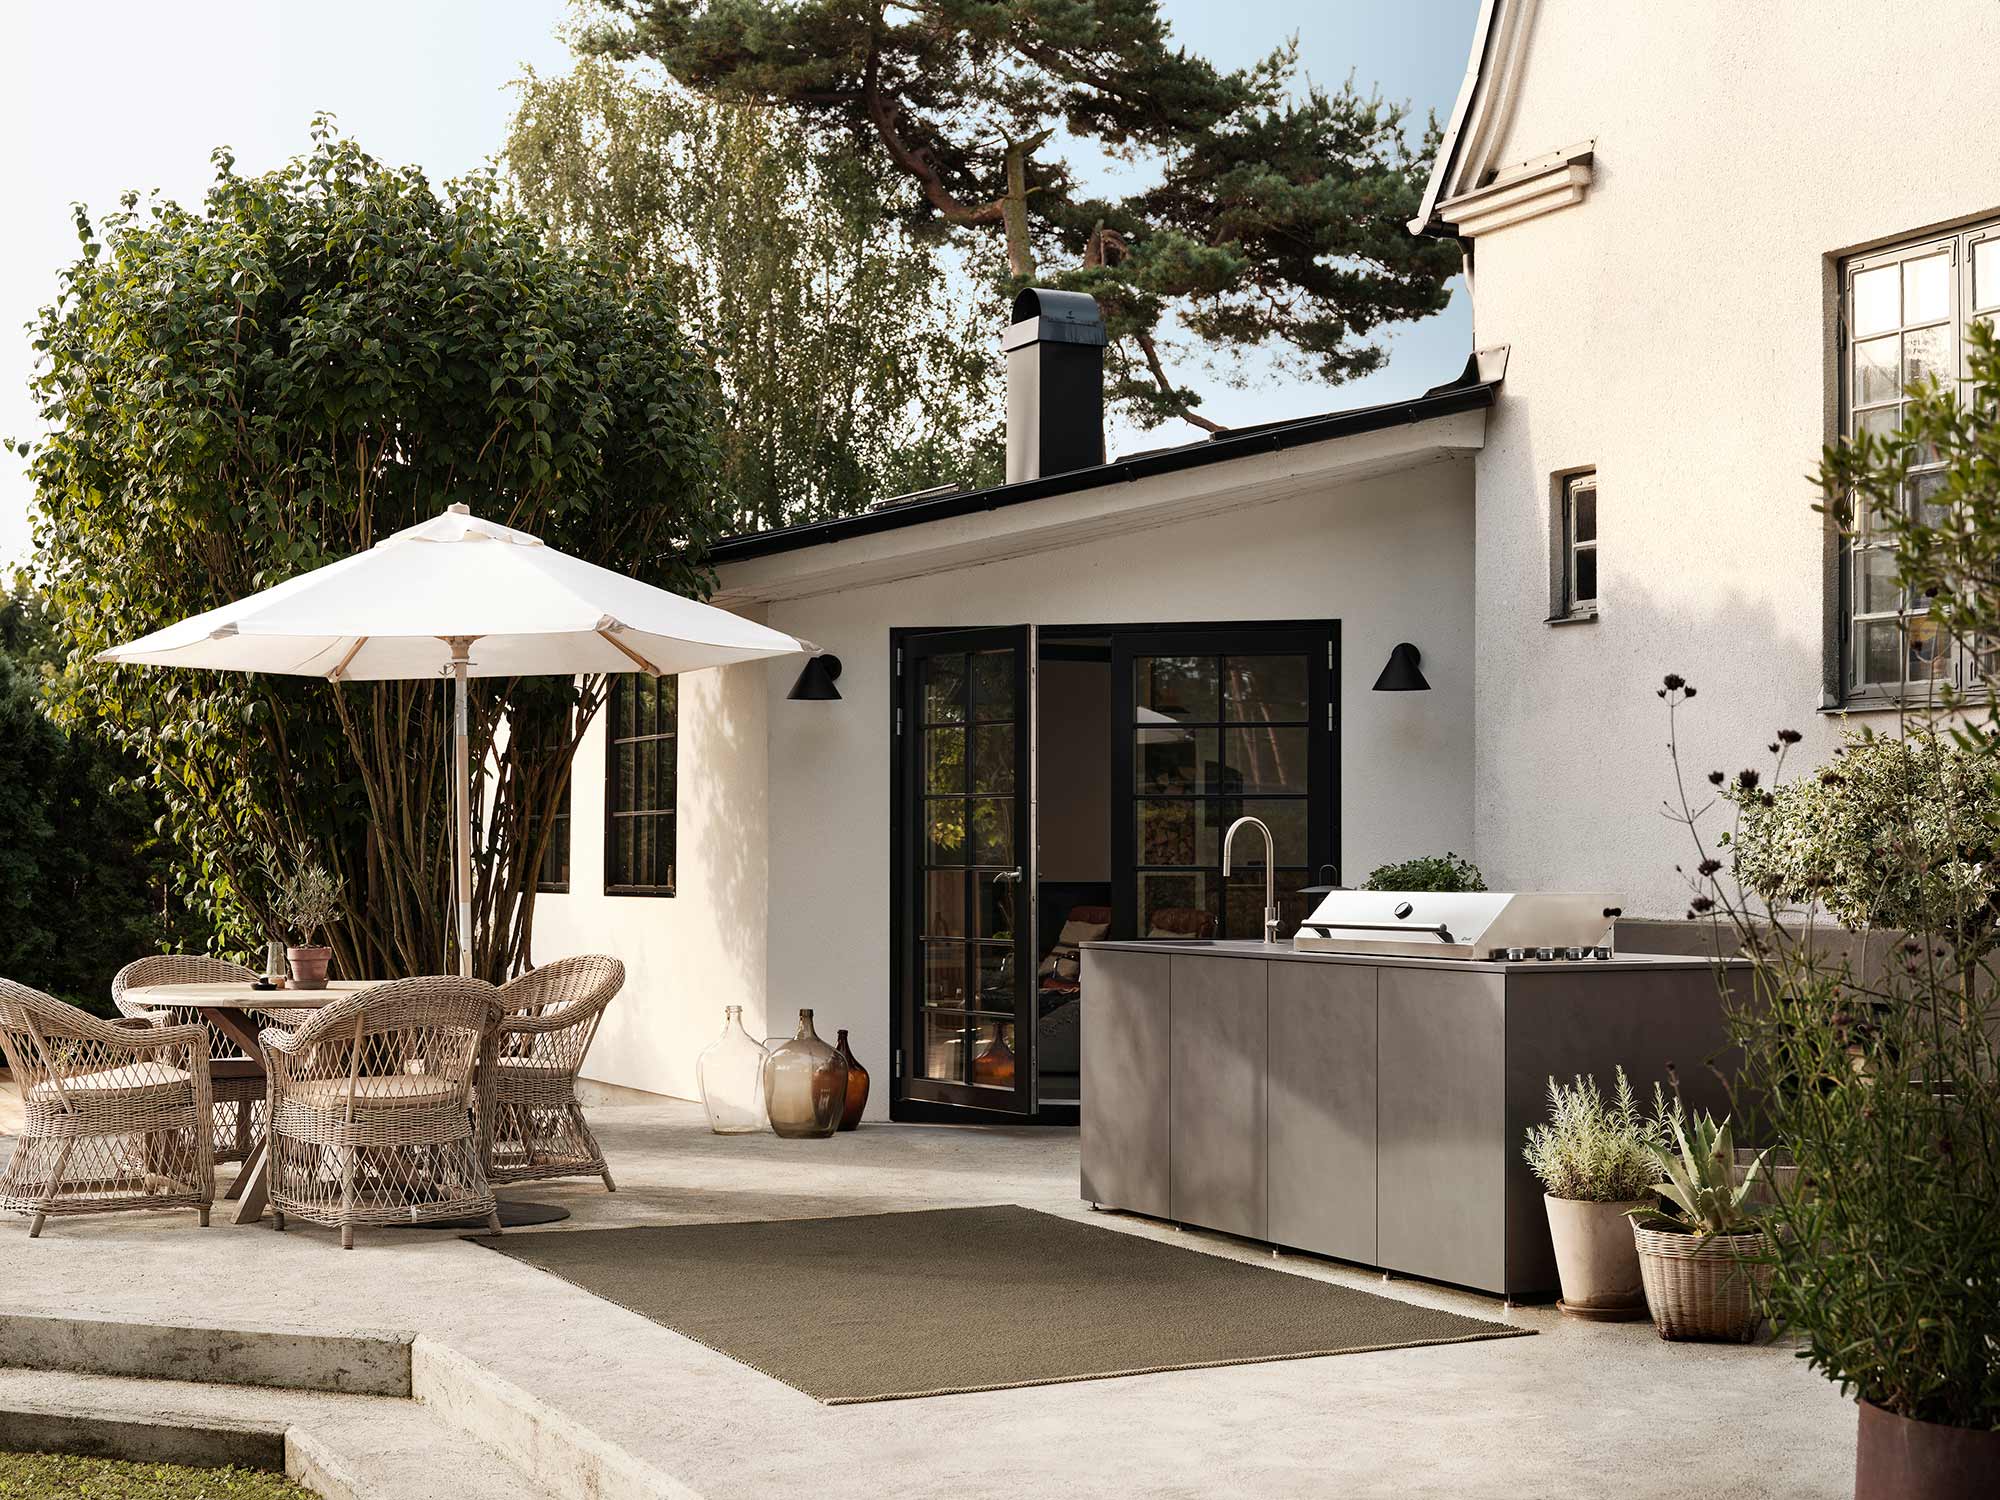 Image of Ballingslov Outdoor kitchen 11 in Cosentino and Ballingslöv AB in collaboration during Stockholm Design Week to launch a new outdoor kitchen - Cosentino